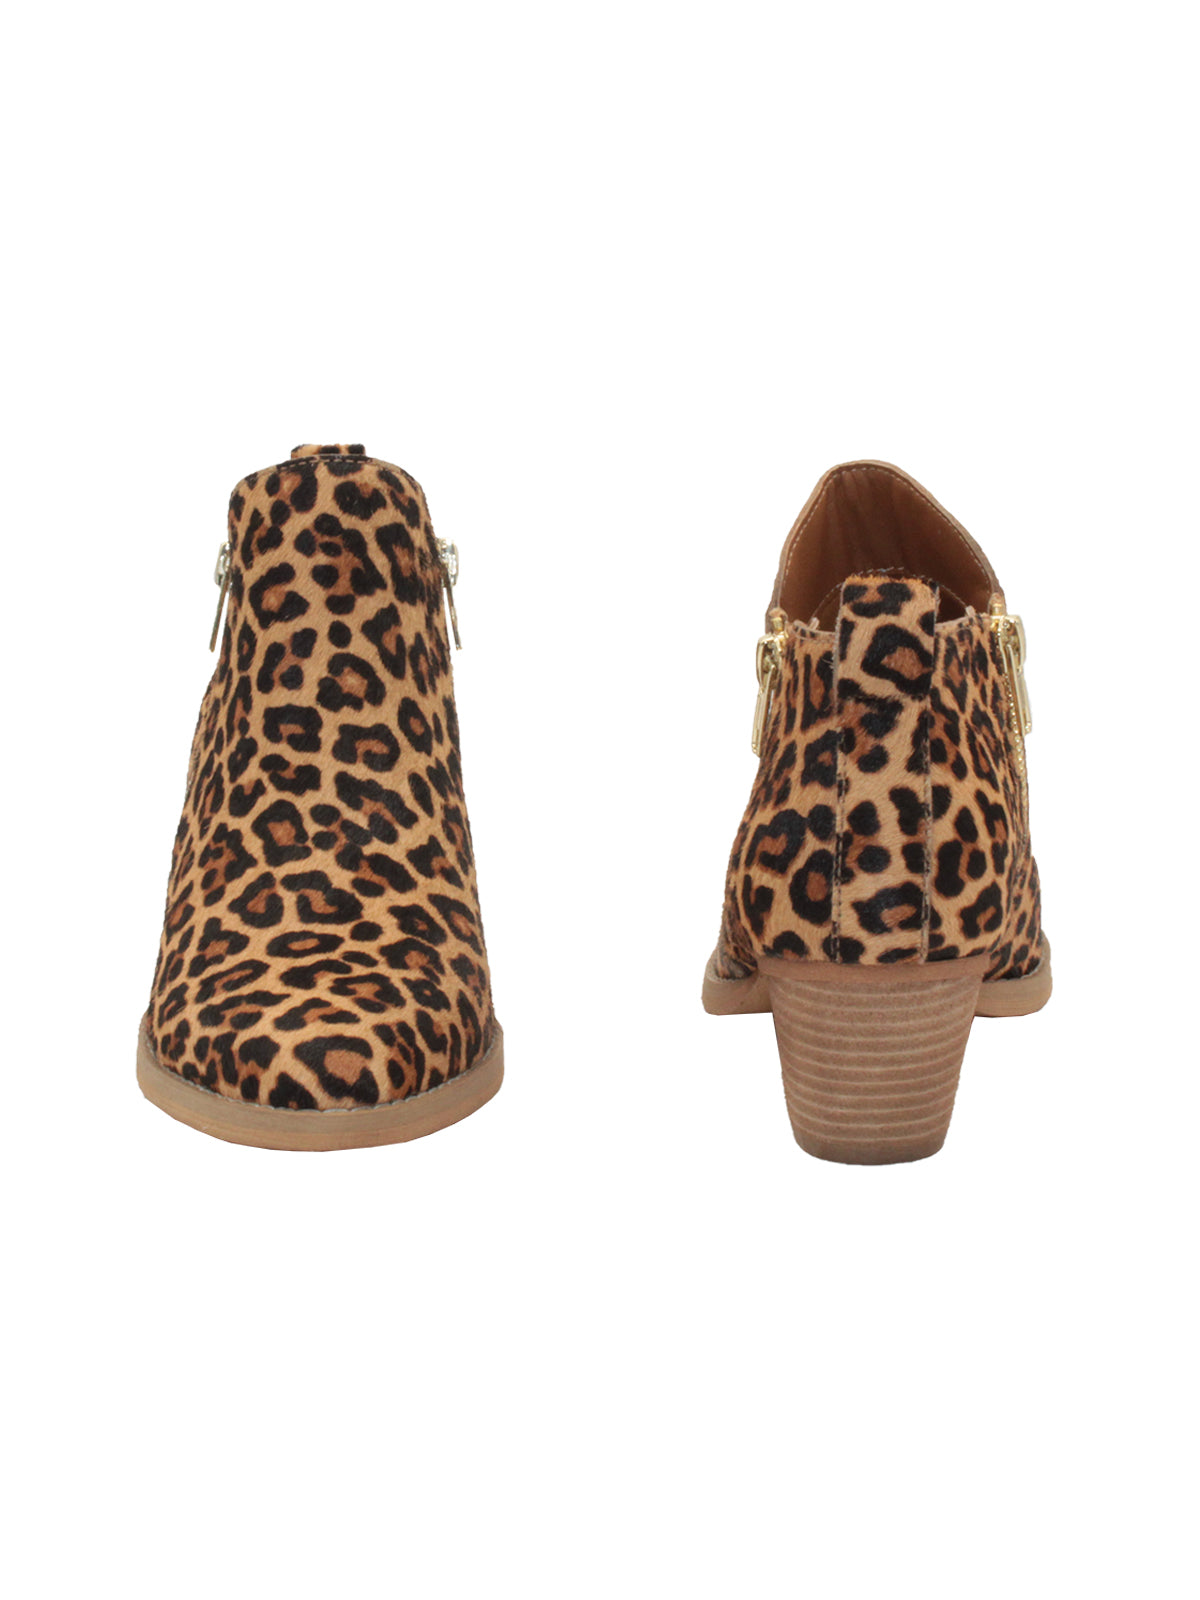 Western inspired Gracemont booties from Very Volatile refresh your wardrobe with on-trend animal print in genuine calf hair. The functioning metal side zippers mean you can slip these on with your favorite pair of jeans and head straight into the weekend.  tan leopard  3